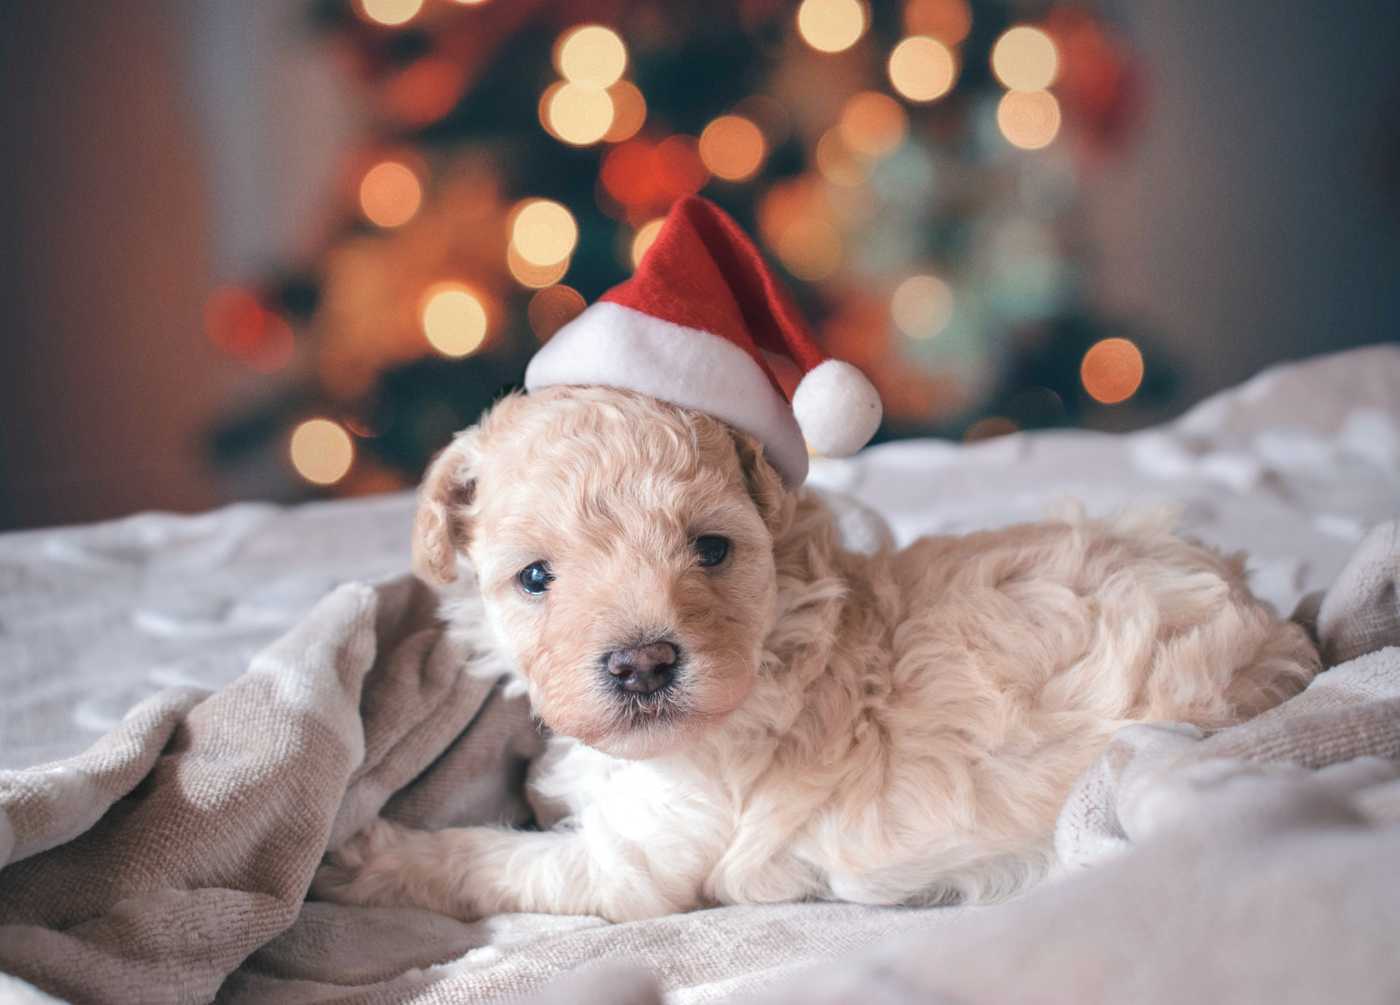 if you got a holiday puppy or christmas puppy, you might now start to feel the puppy blues